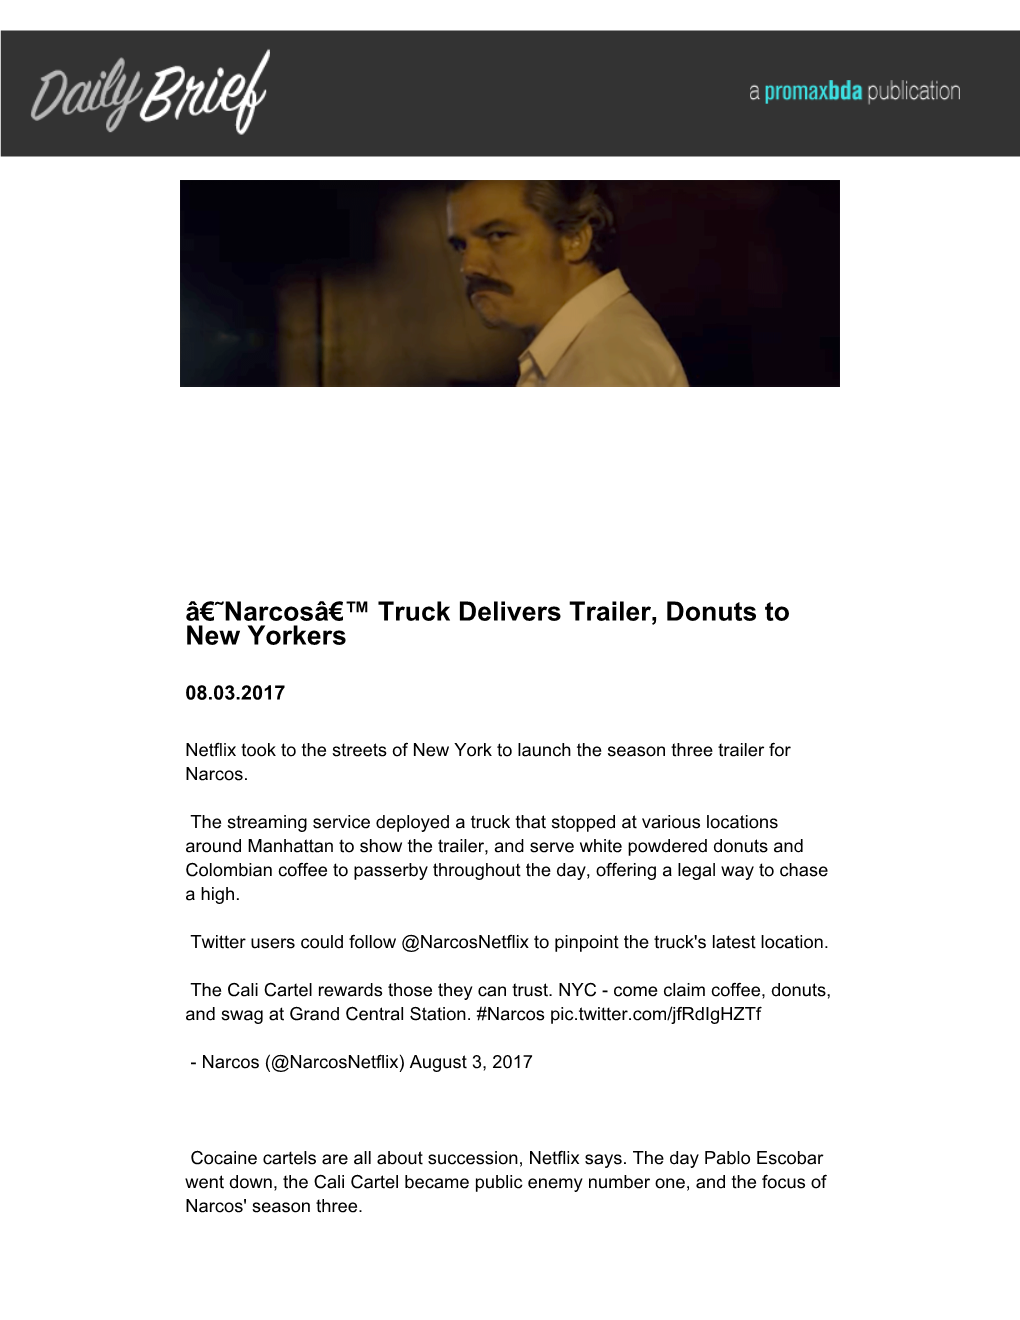 Â€˜Narcosâ€™ Truck Delivers Trailer, Donuts to New Yorkers